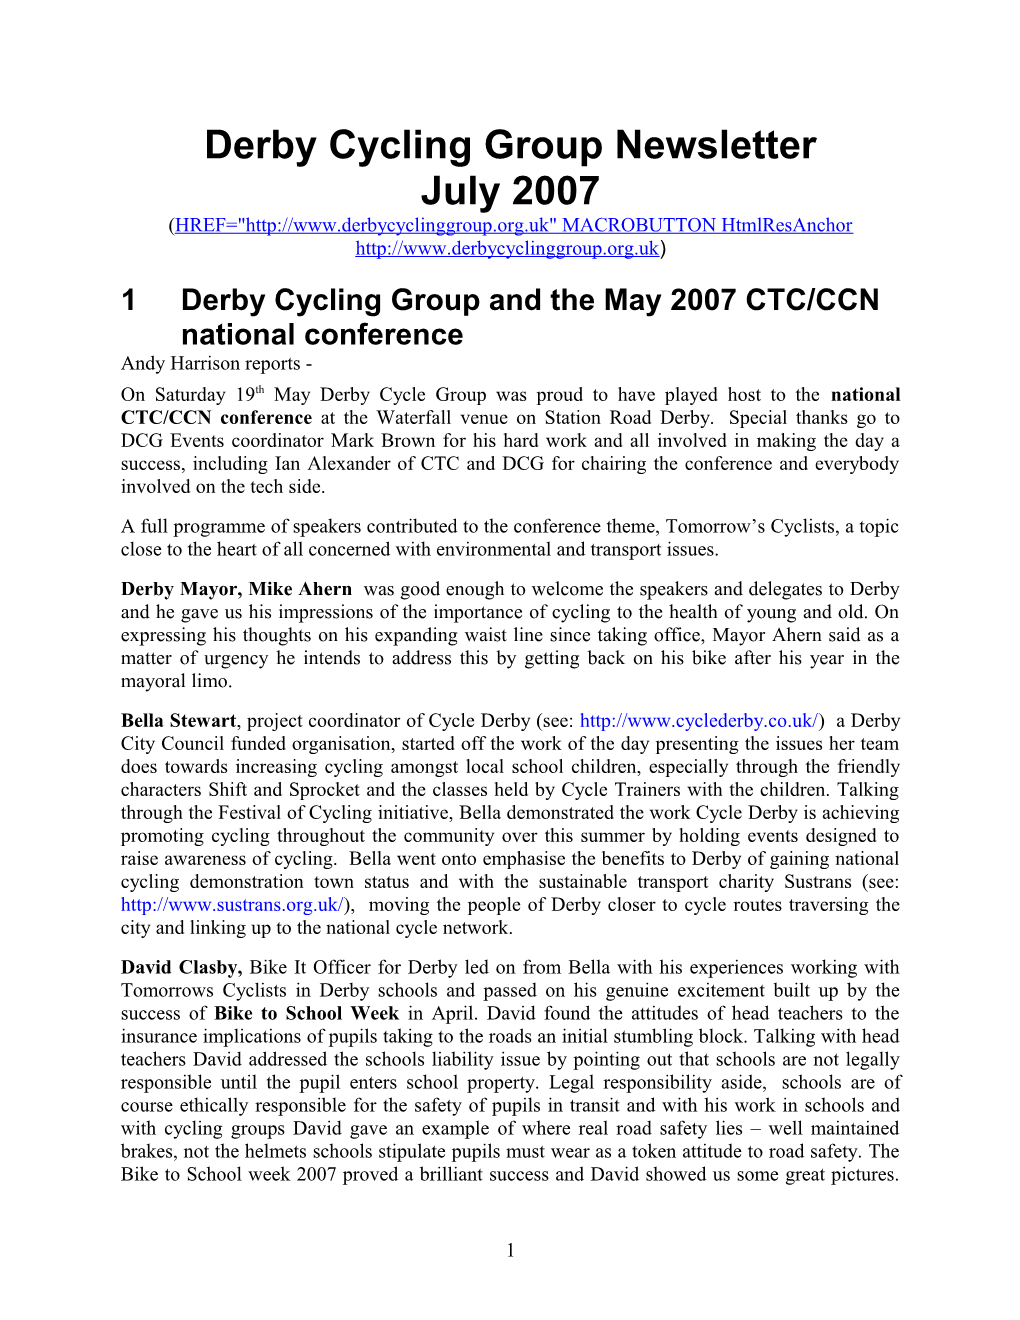 Derby Cycling Group Newsletter, October 2006